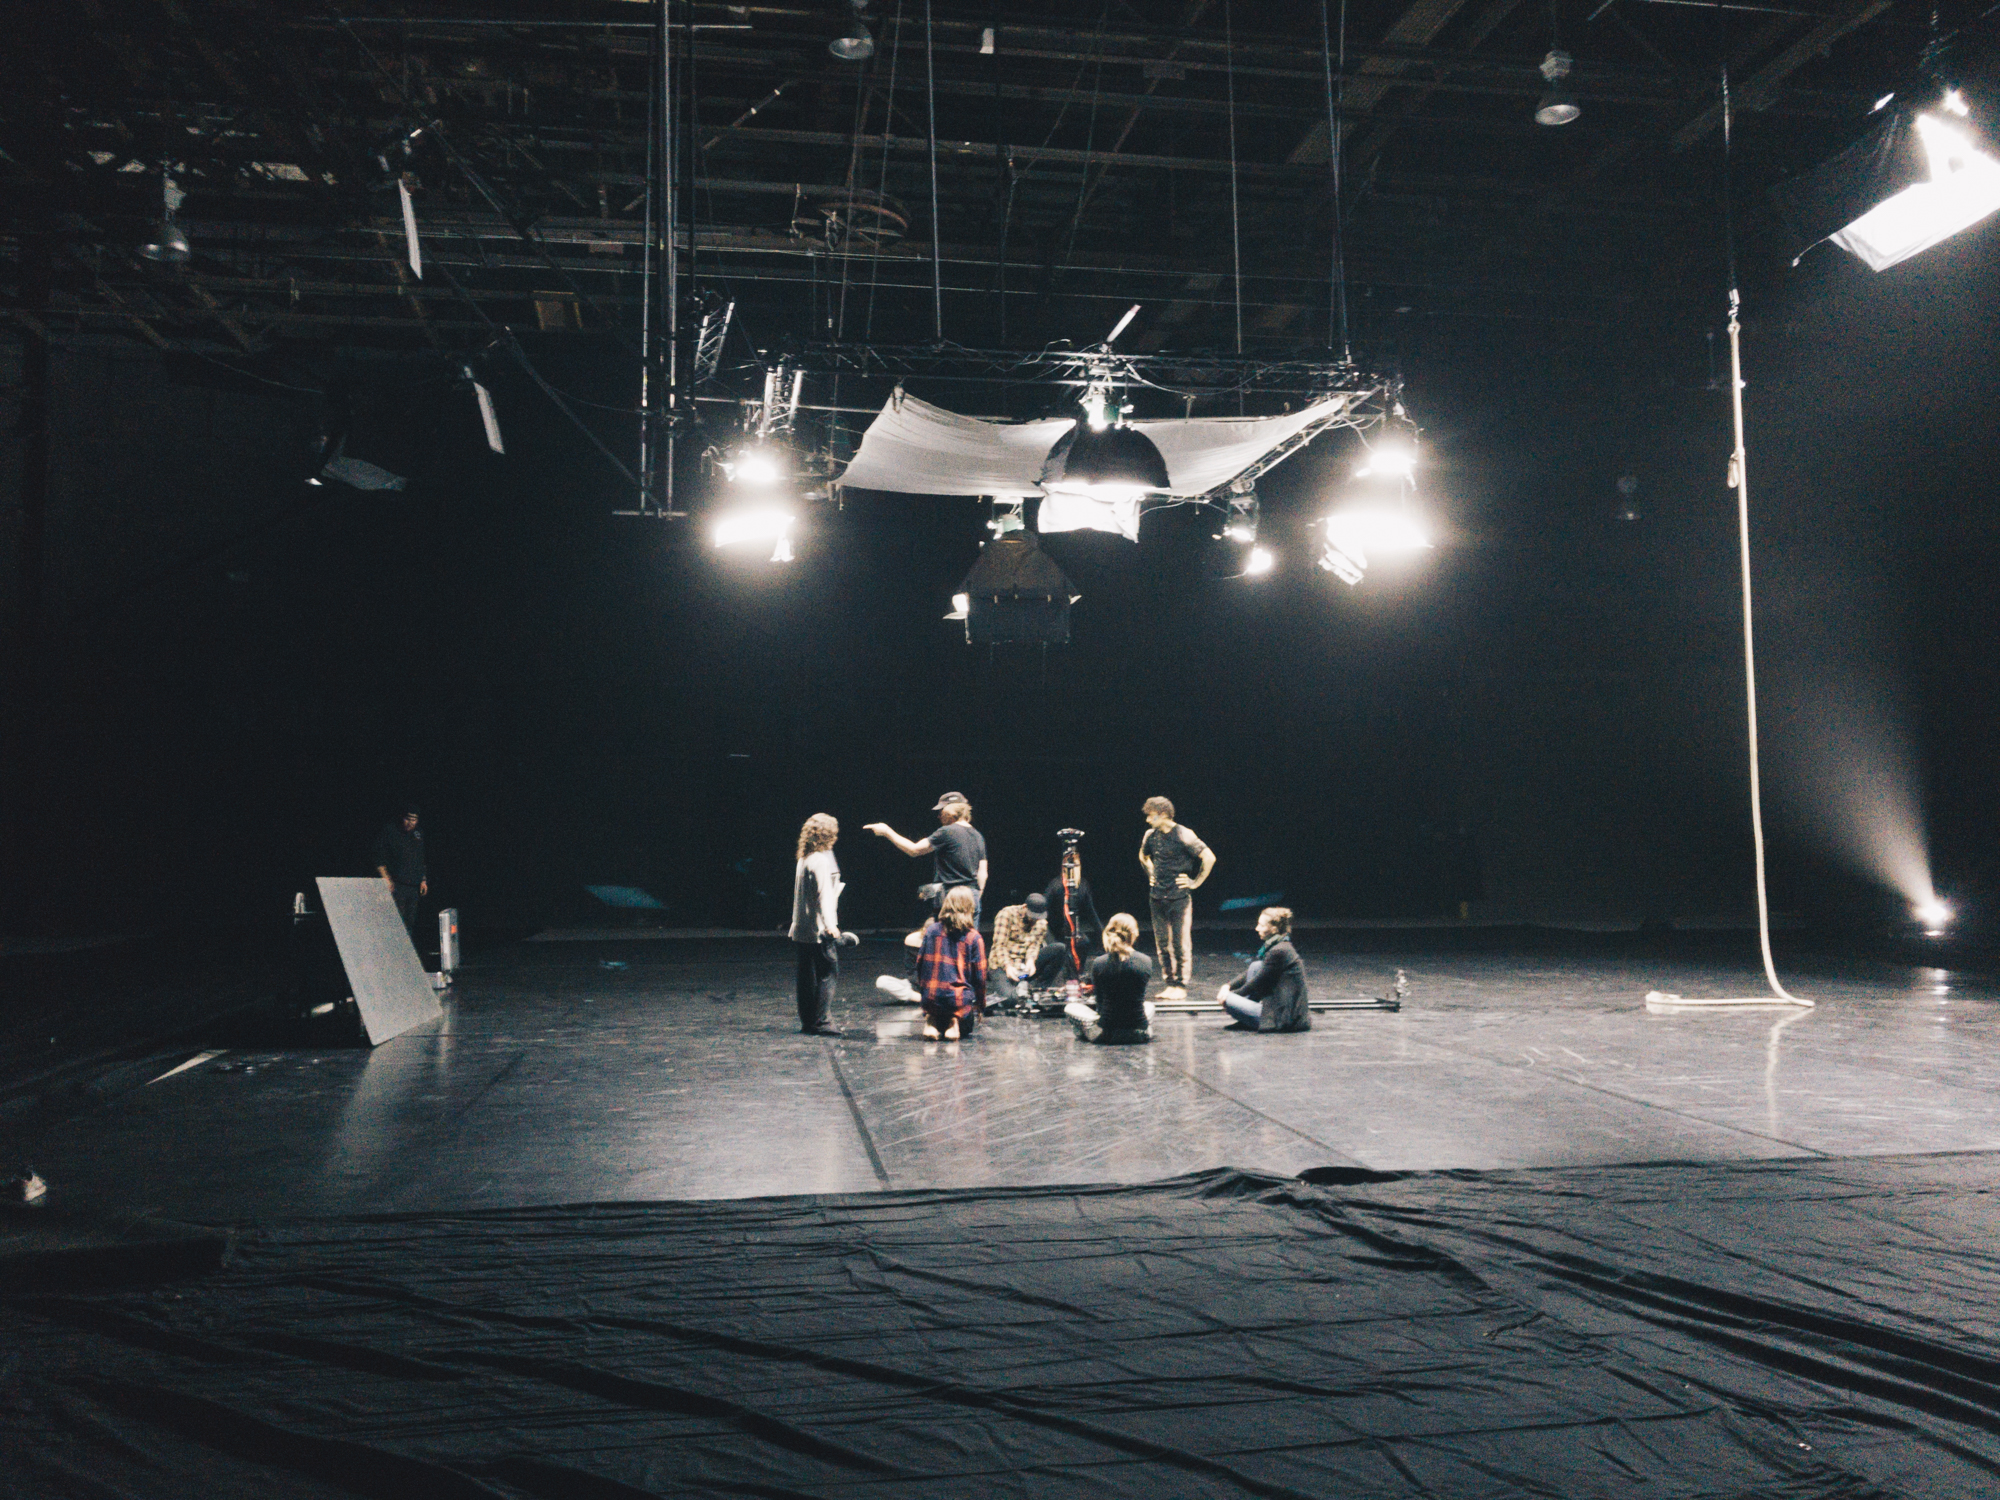 Behind the scenes during the filming of "Fire Together", a documentary featuring the worlds best dancers and performers